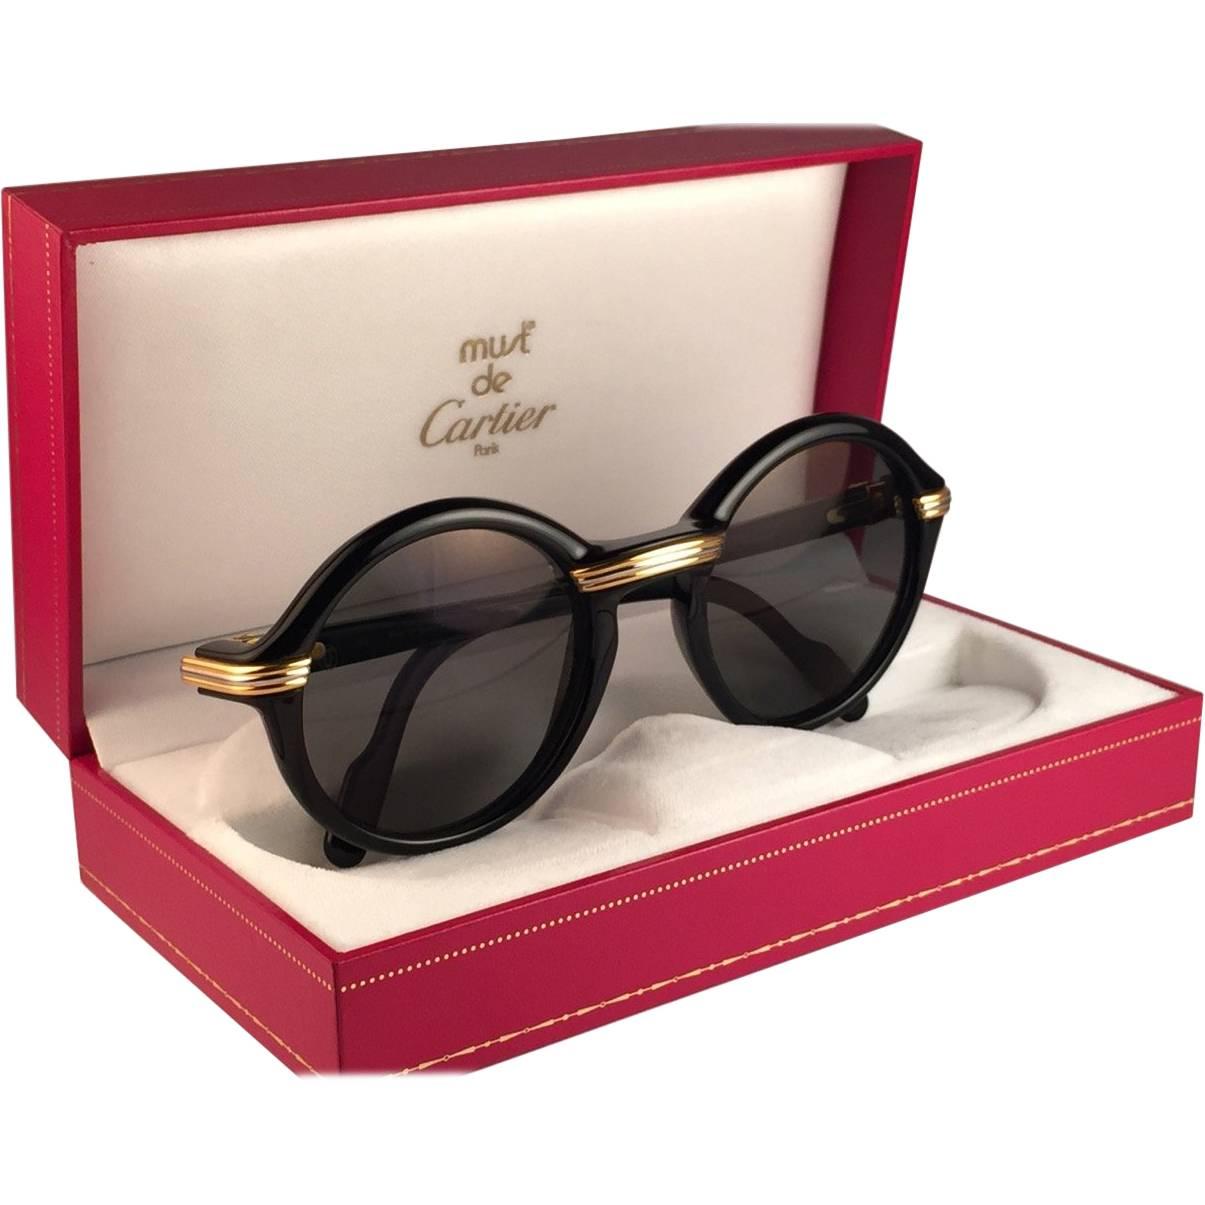 Cartier Cabriolet Round Black and Gold 52MM Gold Sunglasses, France 1990s